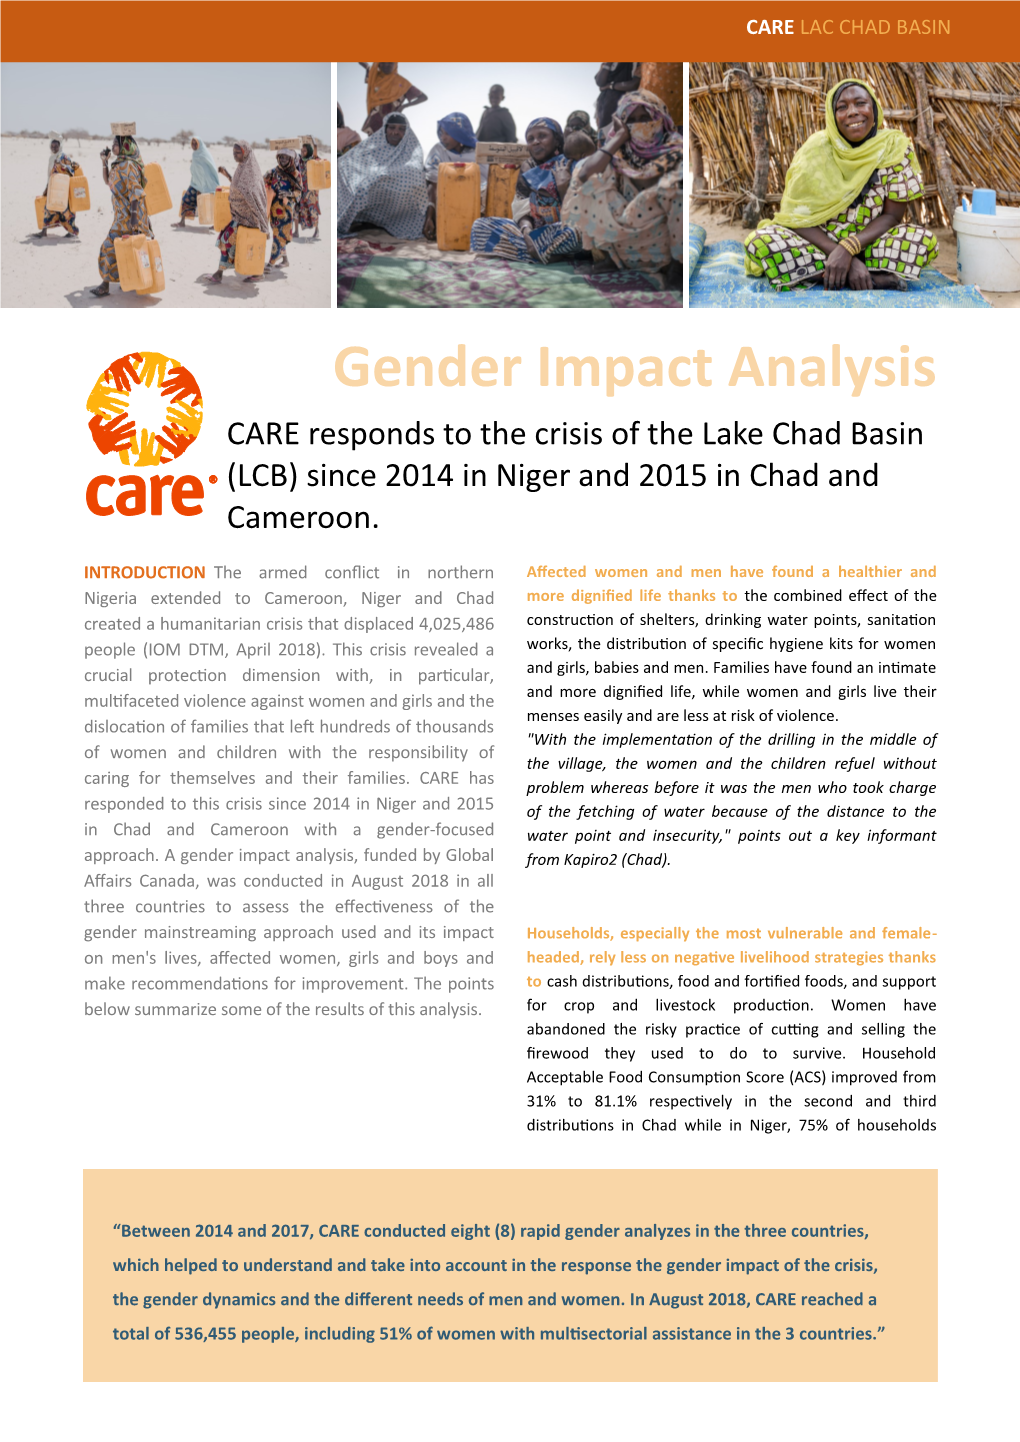 Gender Impact Analysis CARE Responds to the Crisis of the Lake Chad Basin (LCB) Since 2014 in Niger and 2015 in Chad and Cameroon